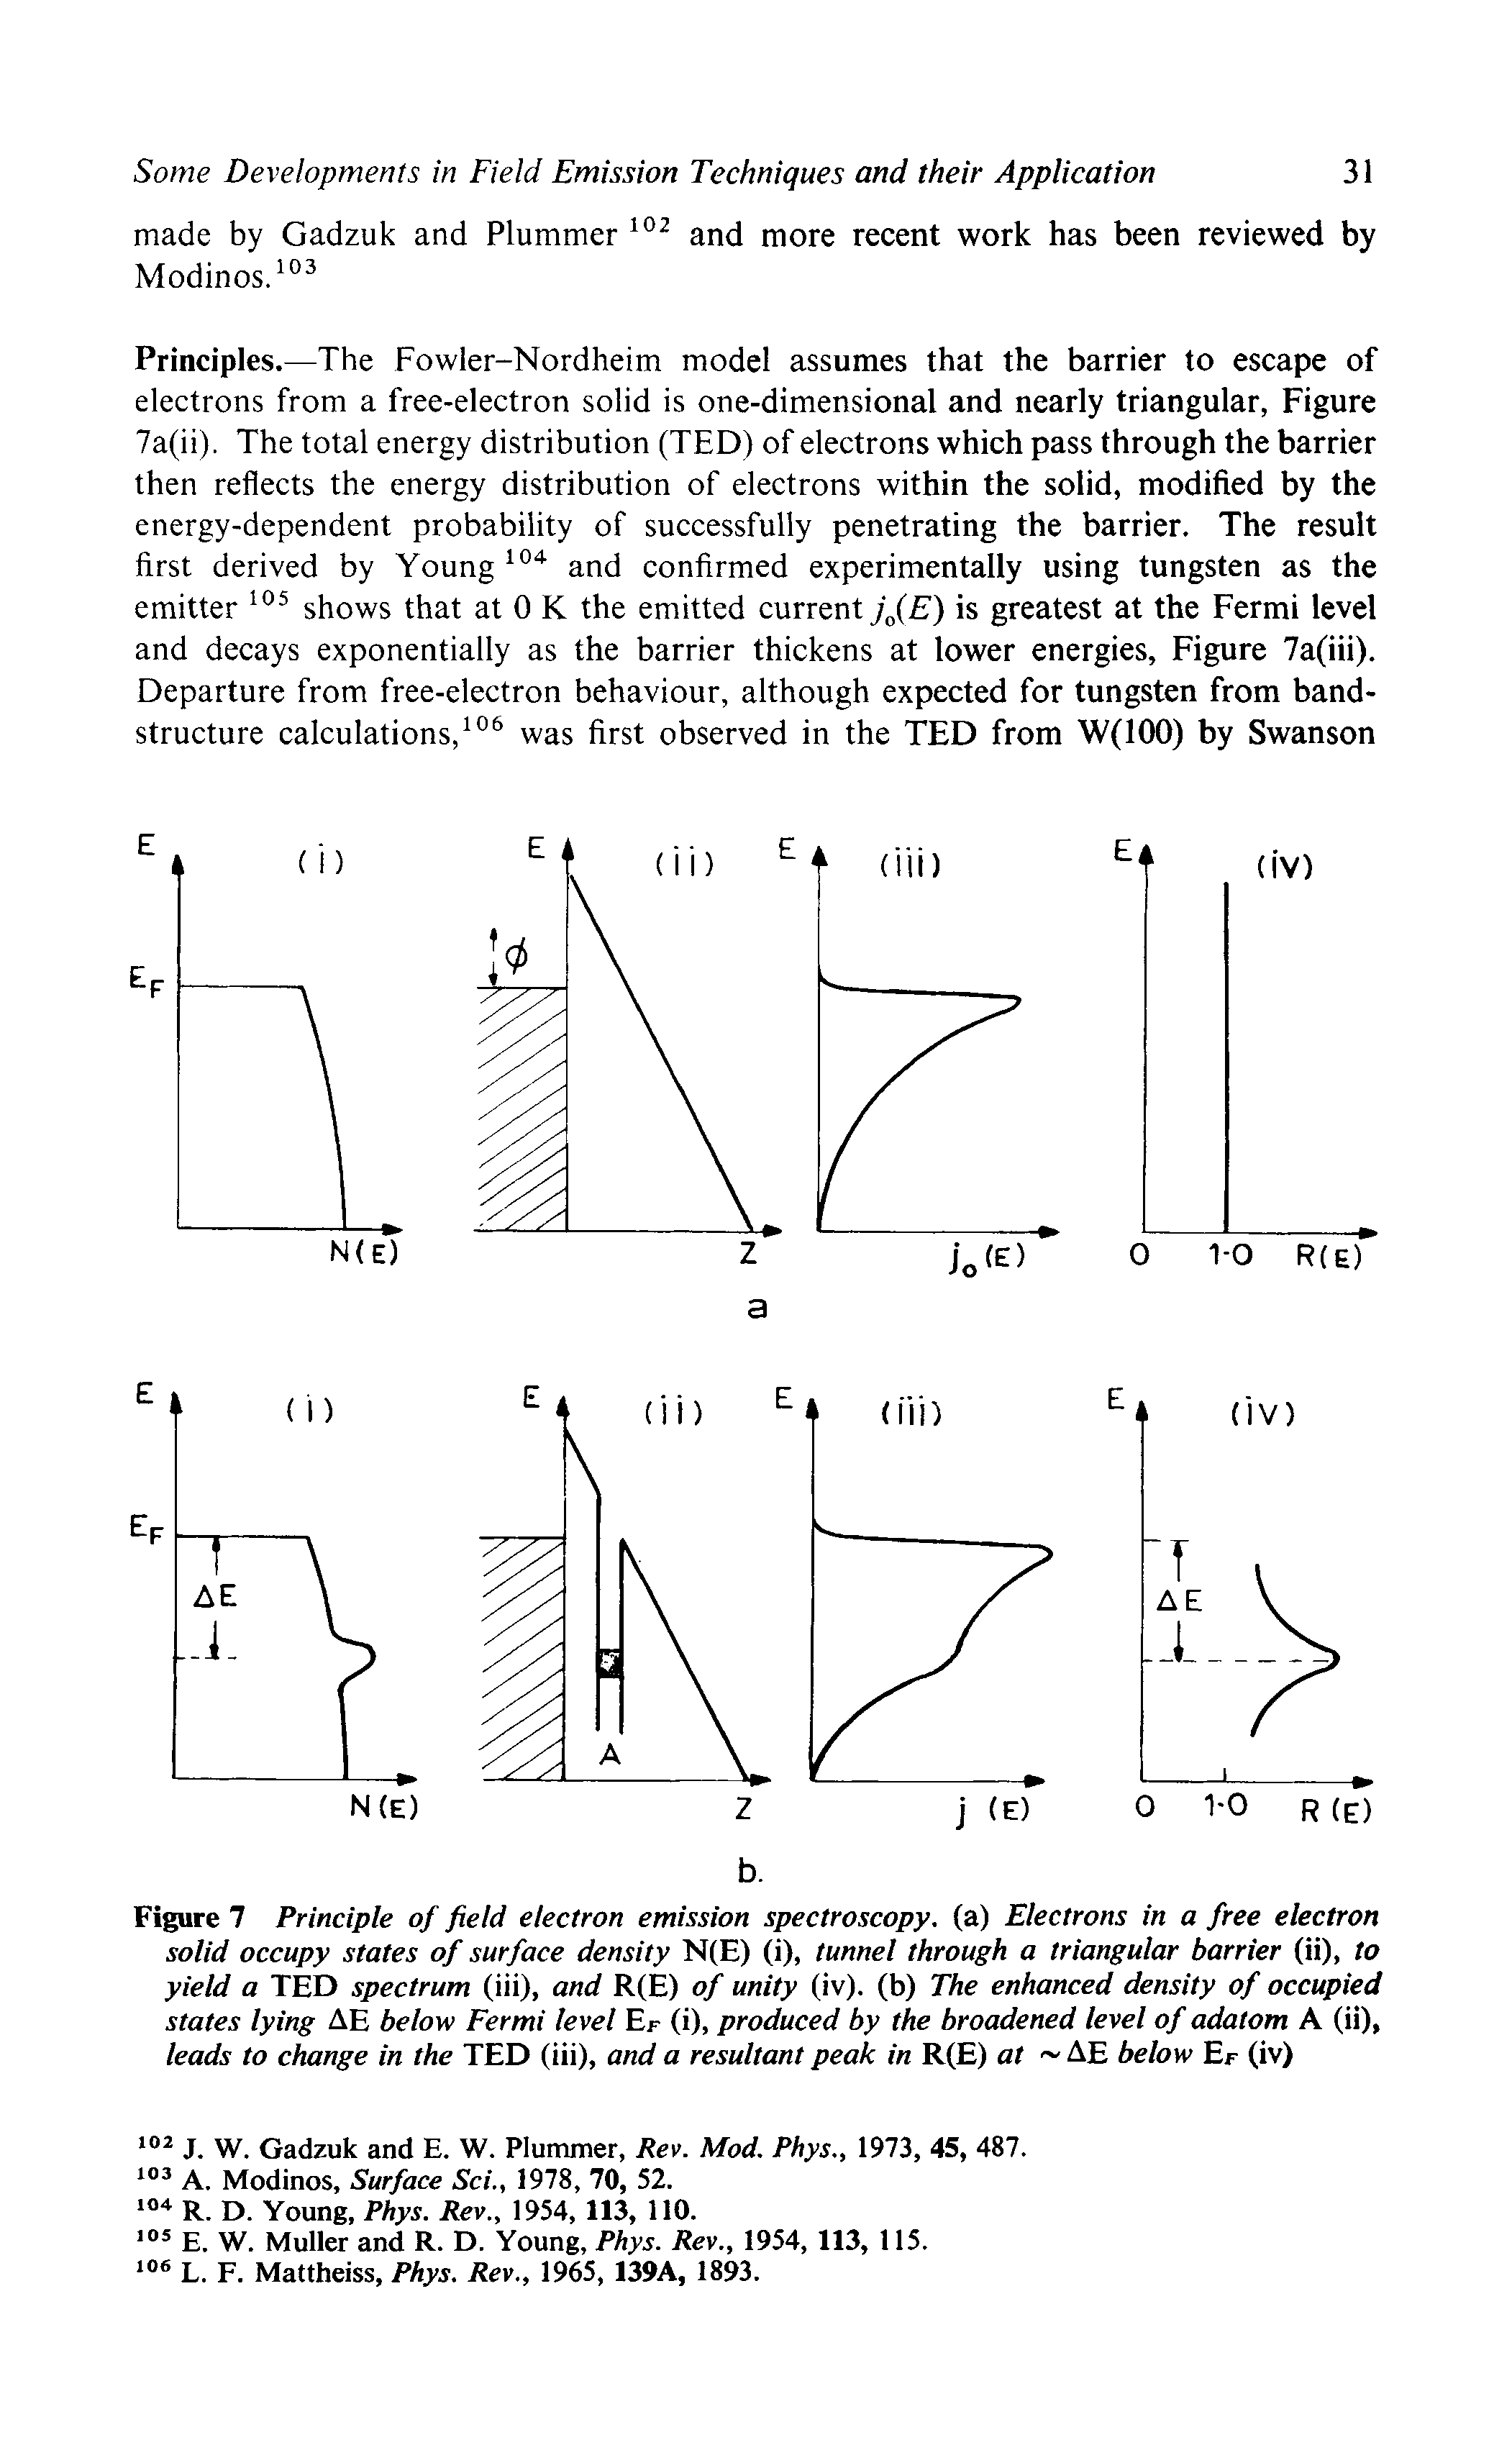 Figure 7 Principle of field electron emission spectroscopy, (a) Electrons in a free electron solid occupy states of surface density N(E) (i), tunnel through a triangular barrier (ii), to yield a TED spectrum (iii), and R(E) of unity (iv). (b) The enhanced density of occupied states lying AE below Fermi level Ef (i), produced by the broadened level of adatom A (ii), leads to change in the TED (iii), and a resultant peak in R(E) at AE below Ef (iv)...